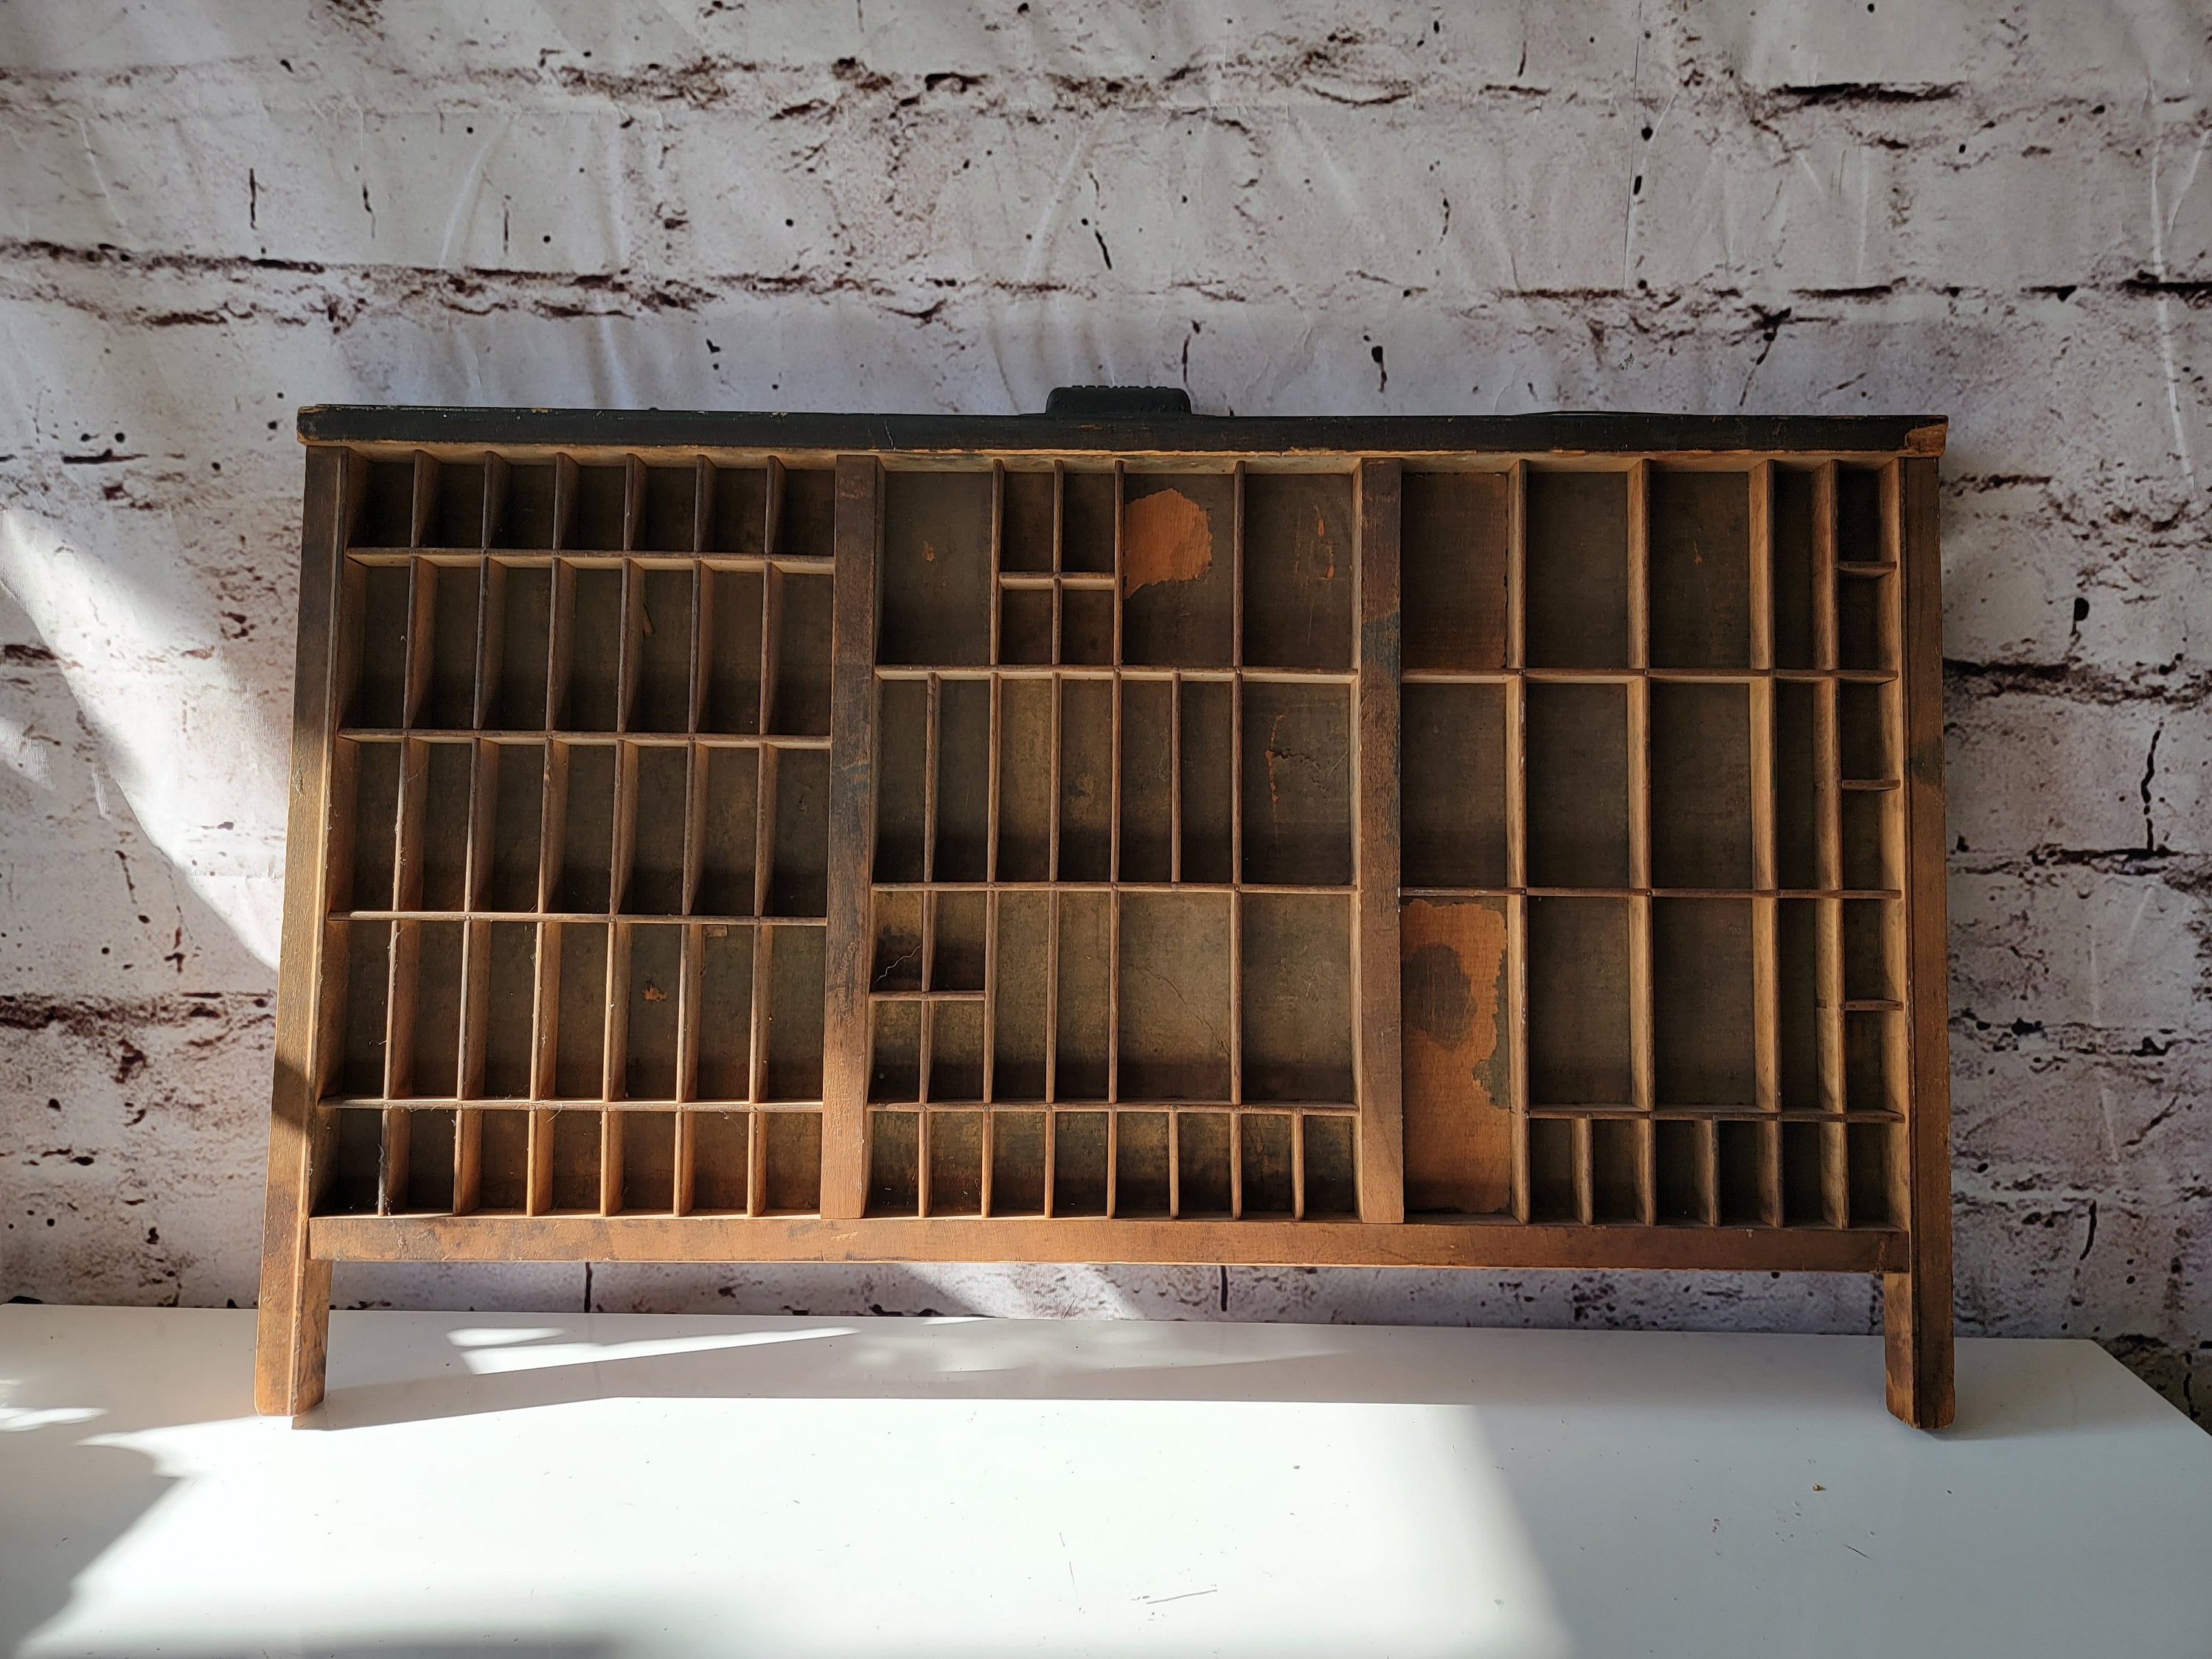 Letterpress Vintage Printers Tray Wood Drawer Filled with Rocks/Minerals